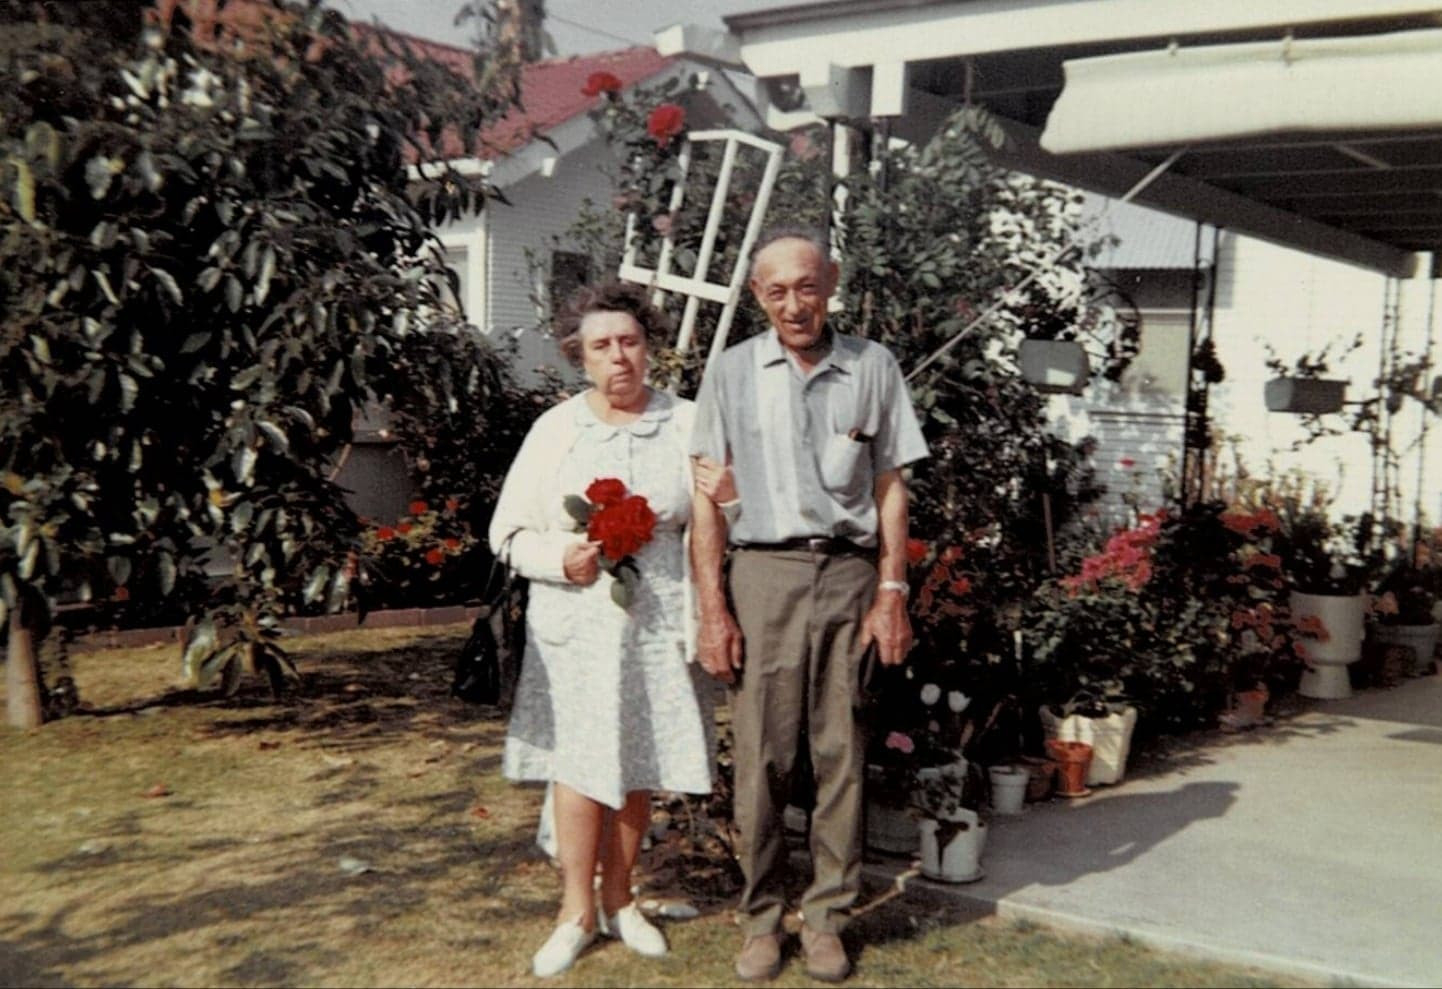 Cleota And her husband Tony standing it their backyard 